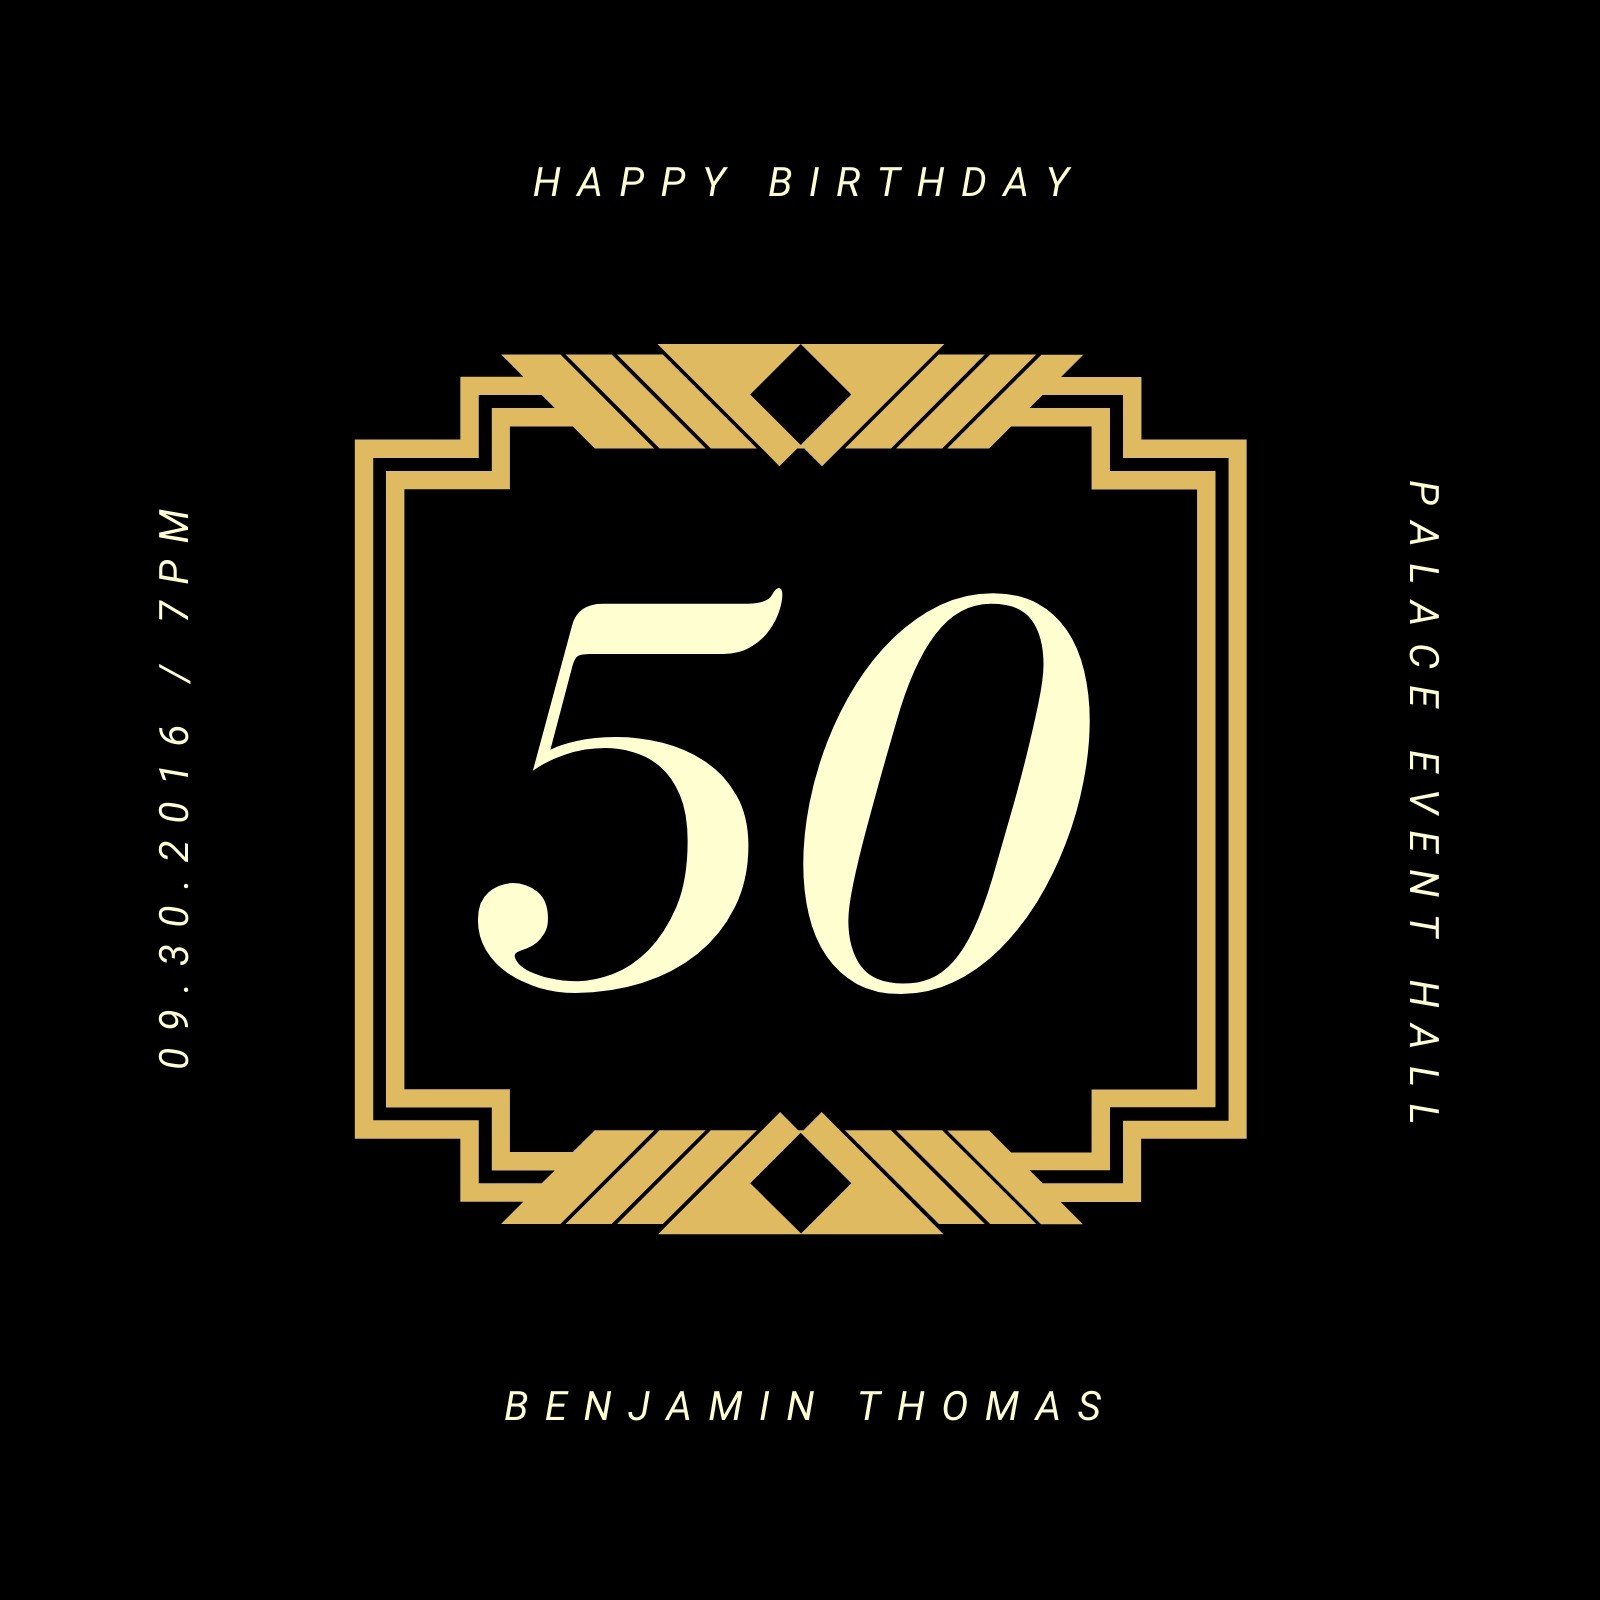 50th-birthday-flyer-template-free-best-template-ideas